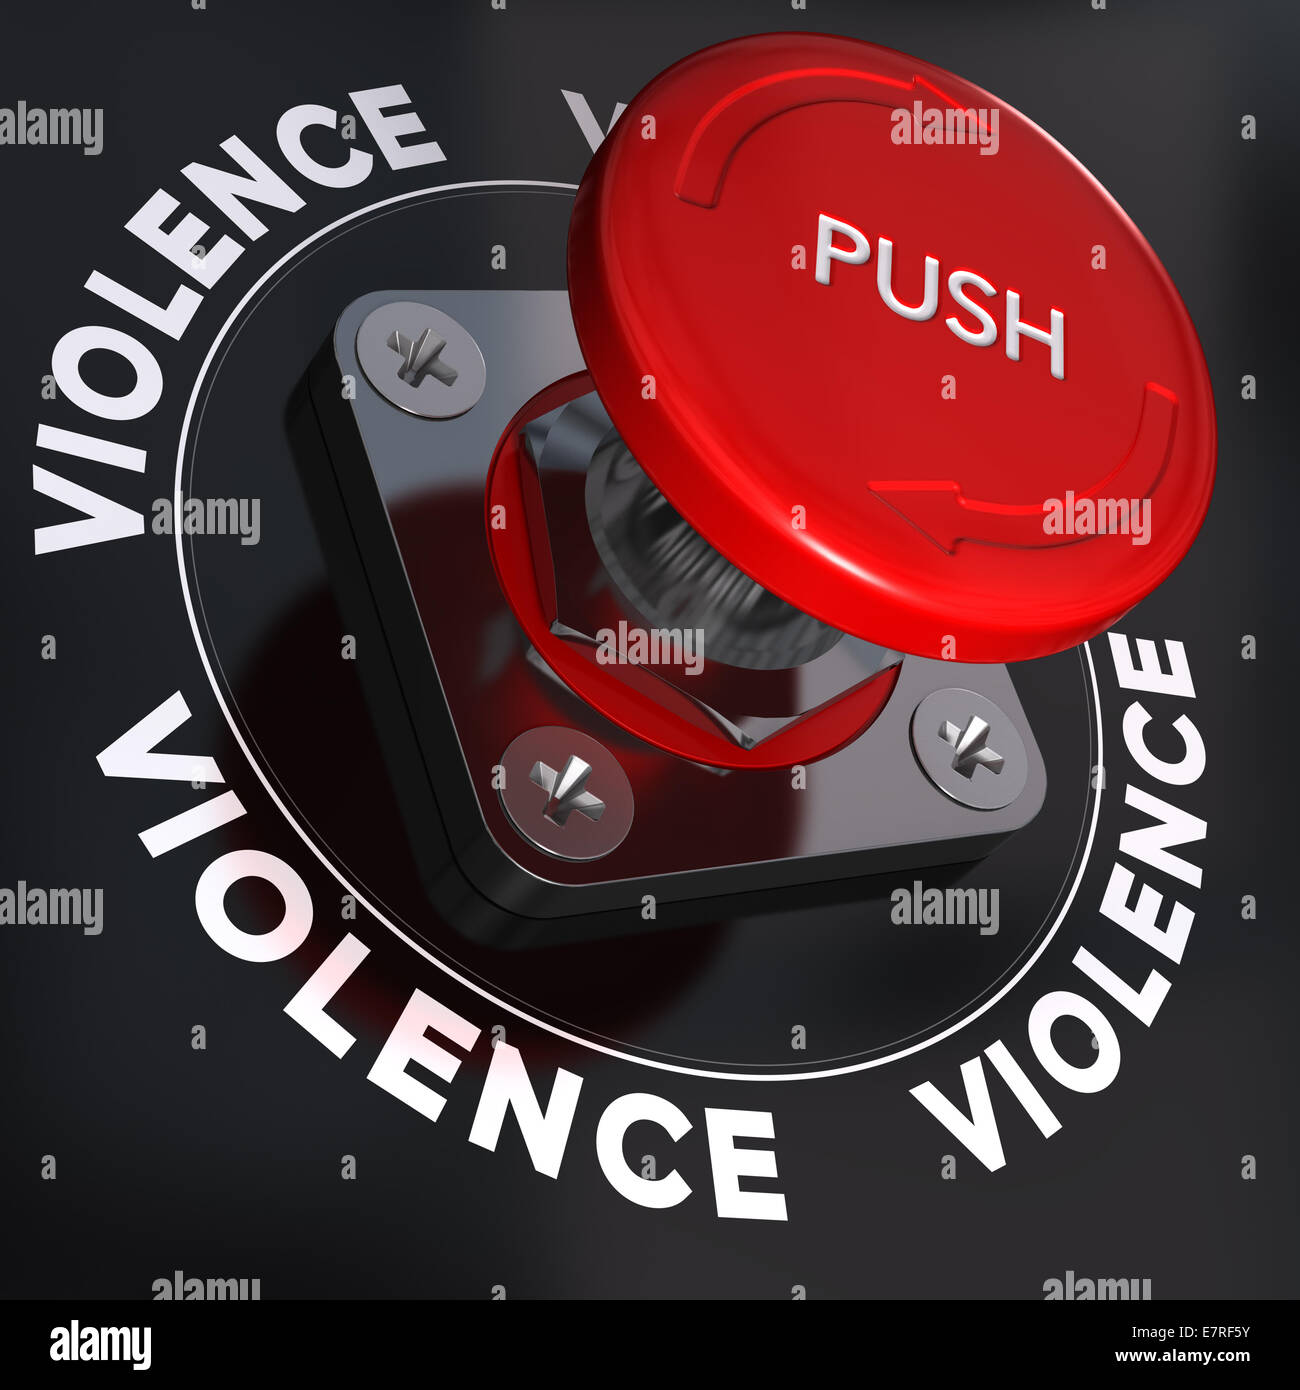 Panic button with the word violence, symbol of relationship conflicts Stock Photo